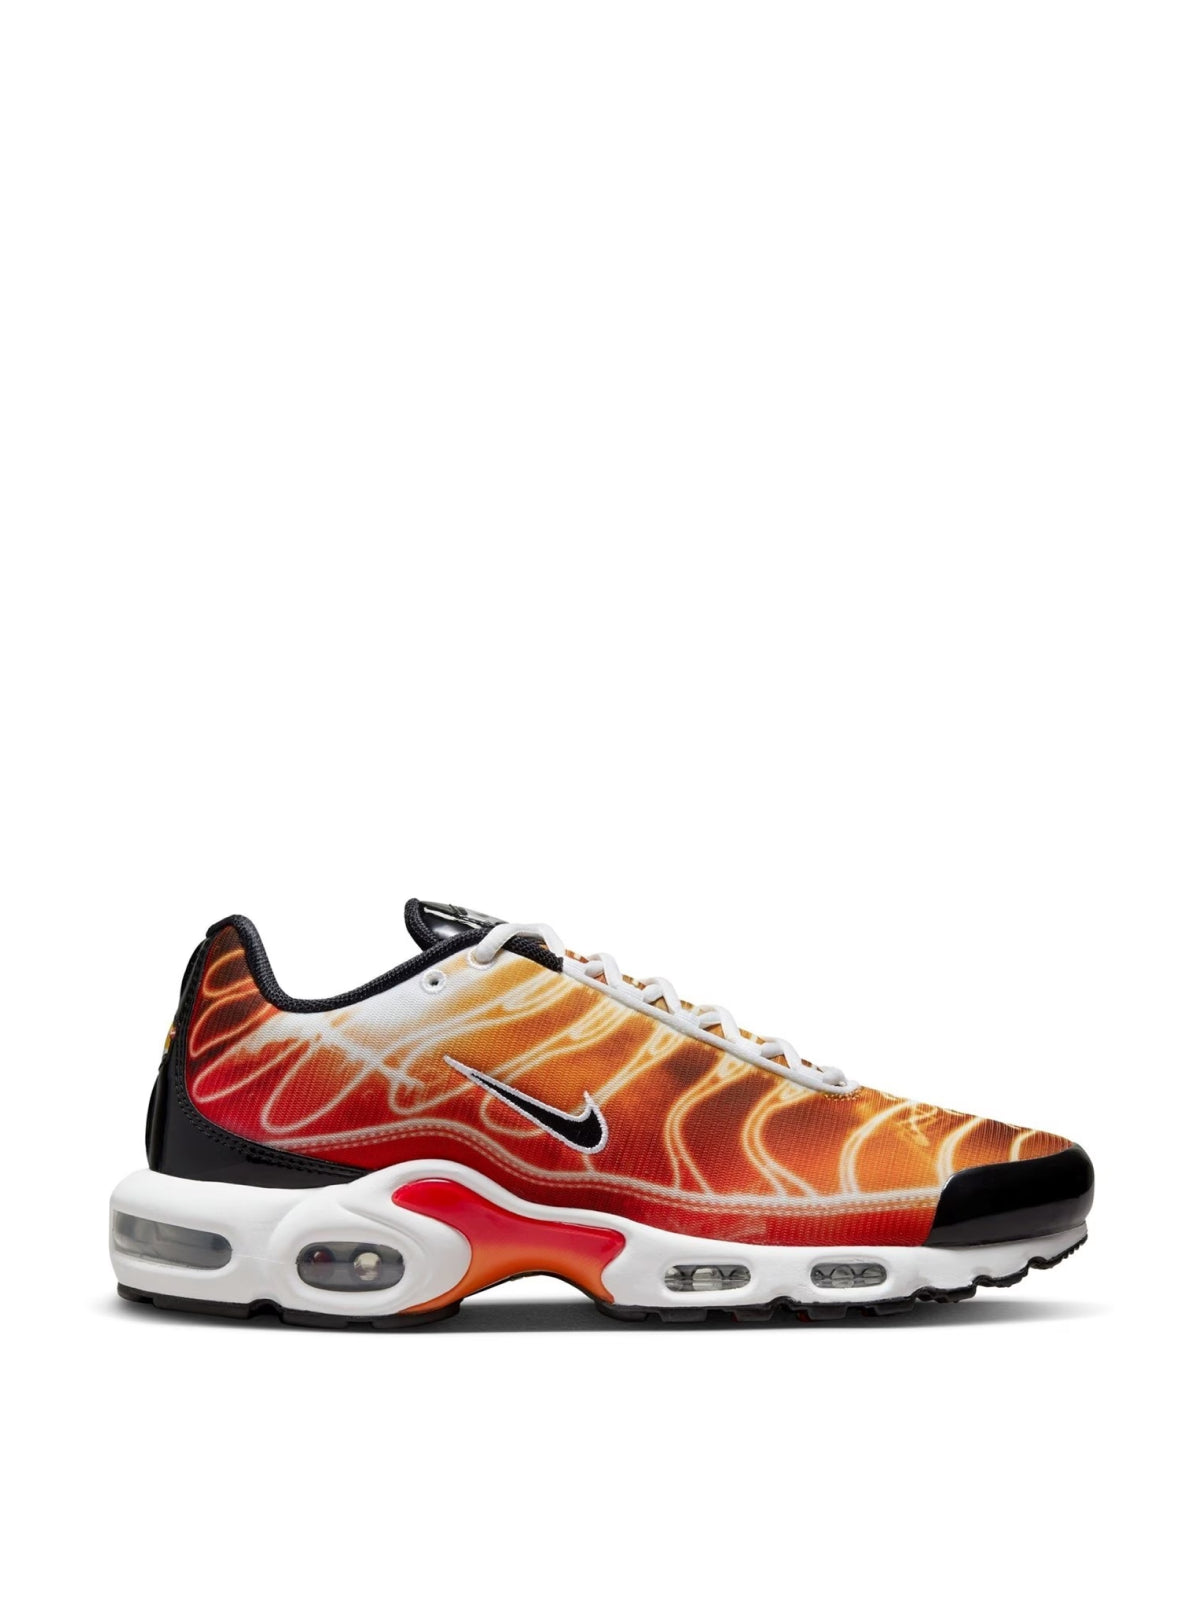 Air Max Plus Og "Light Photography" Sneakers